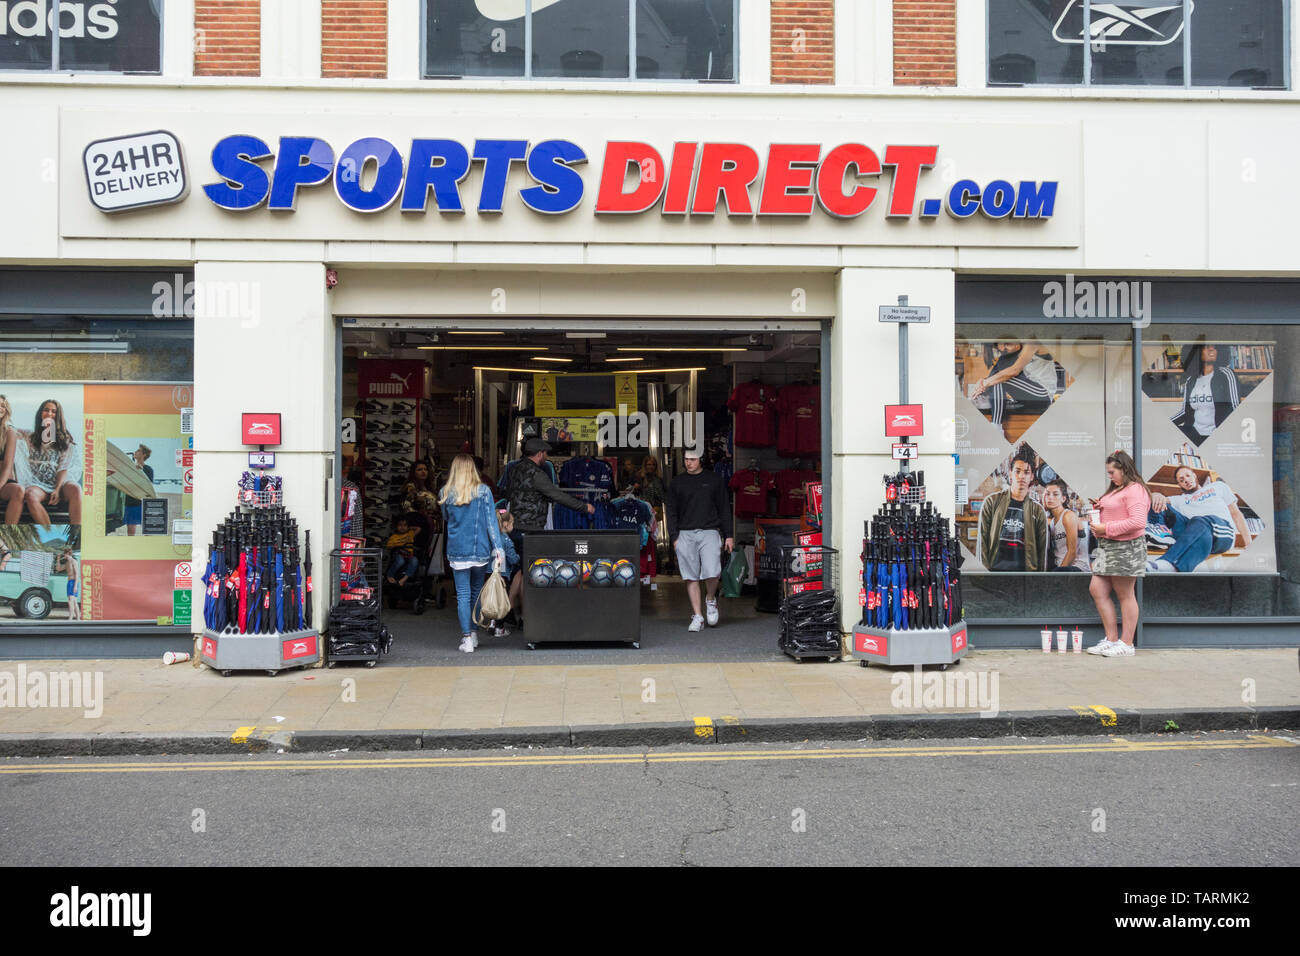 Sports Direct Shop front in Kingston, Surrey, UK Stock Photo